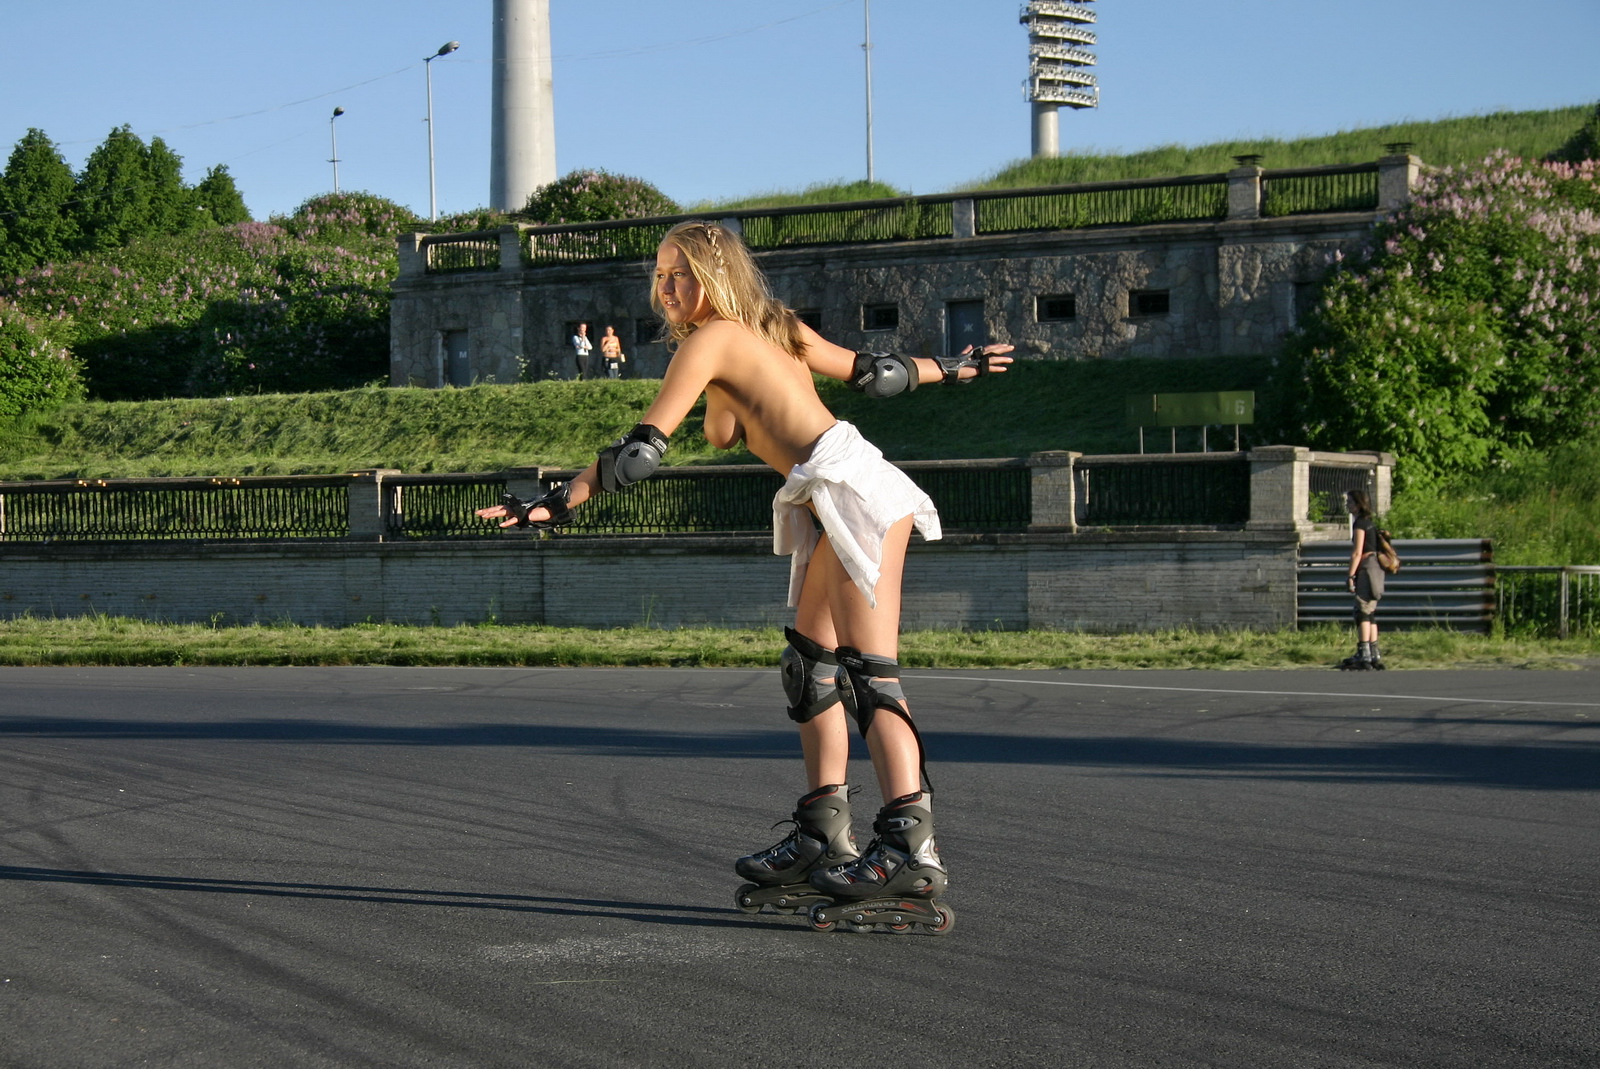 Return to Sonya A - Sweet young rollergirl. sonya-a-young-nude-rollergirl-b...